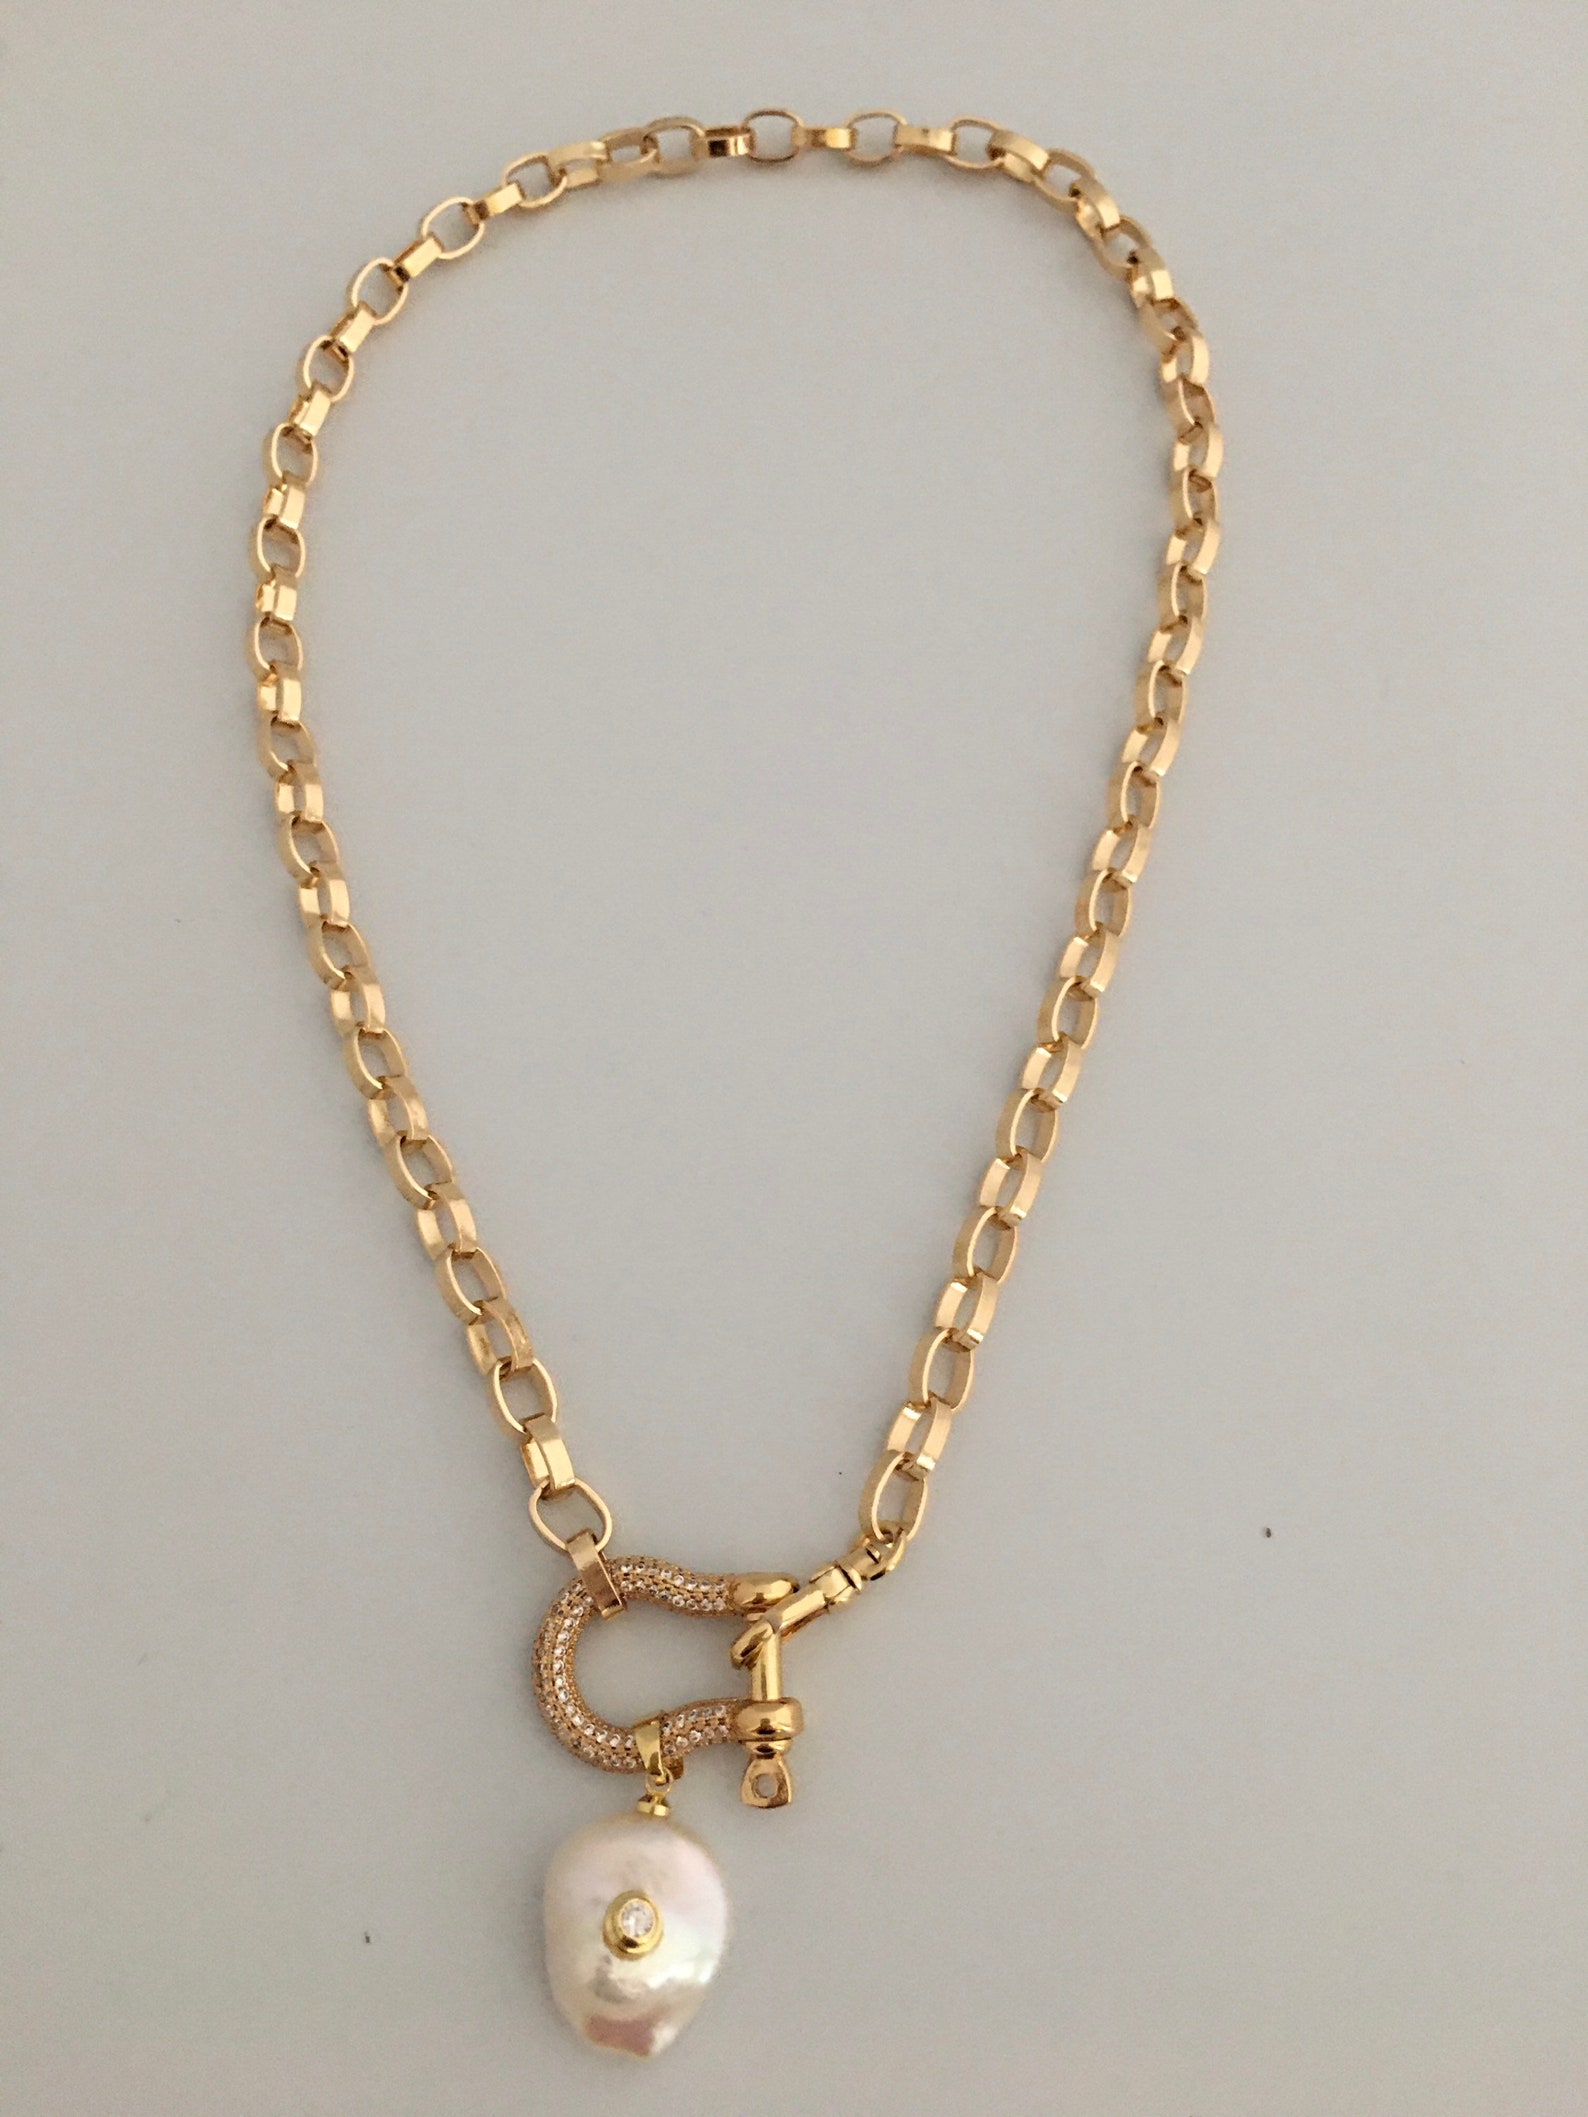 Carabiner Shackle Chain Necklace-Gold Pave Shackle Necklace-CZ | Etsy